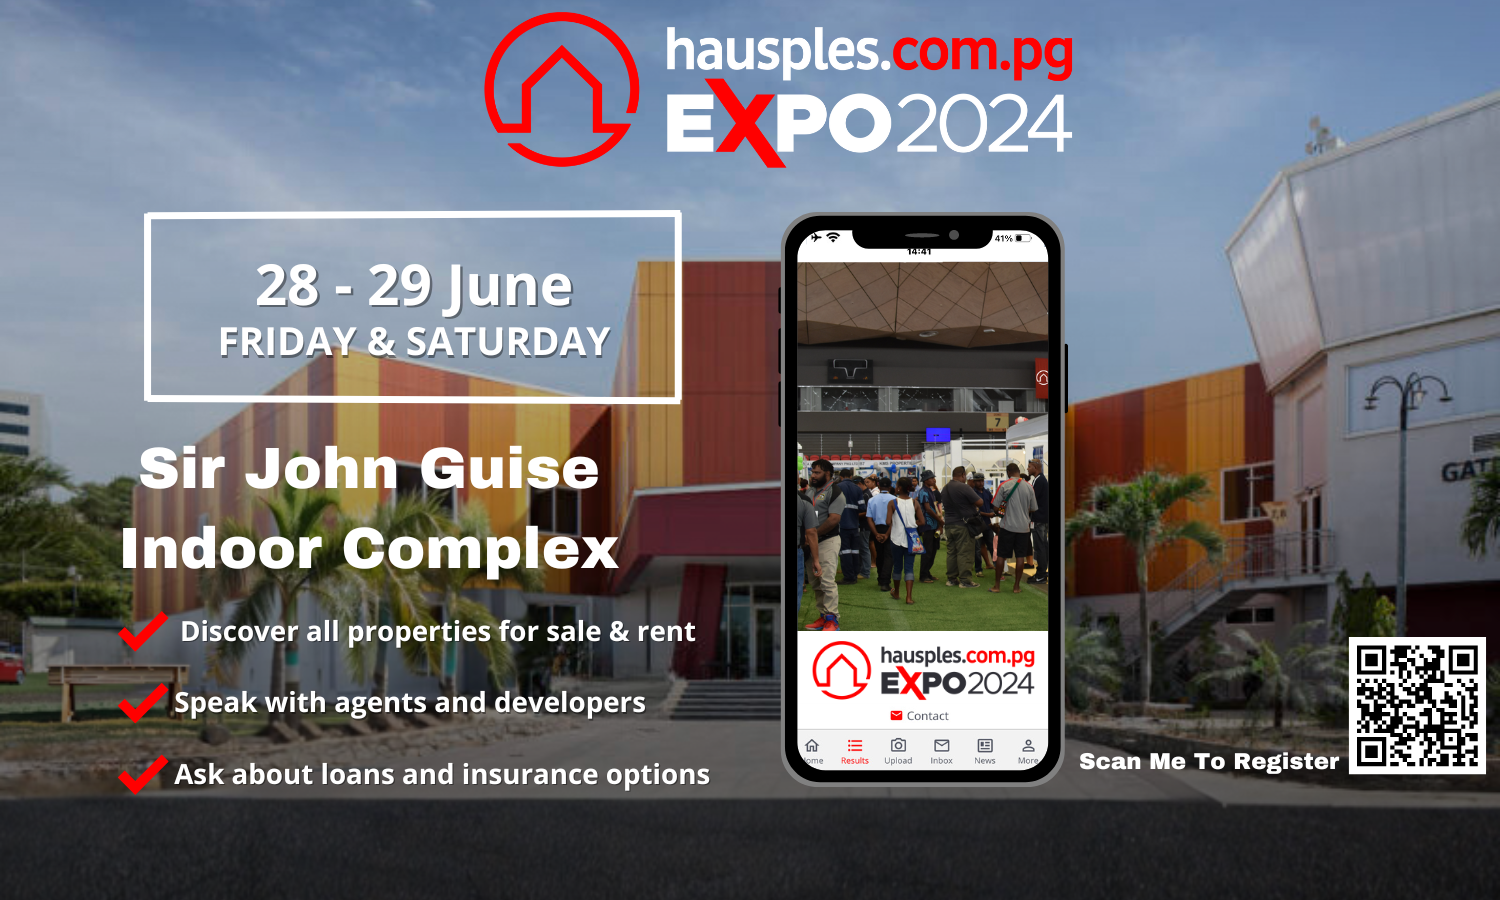 Hausples launches the 2024 Real Estate Expo